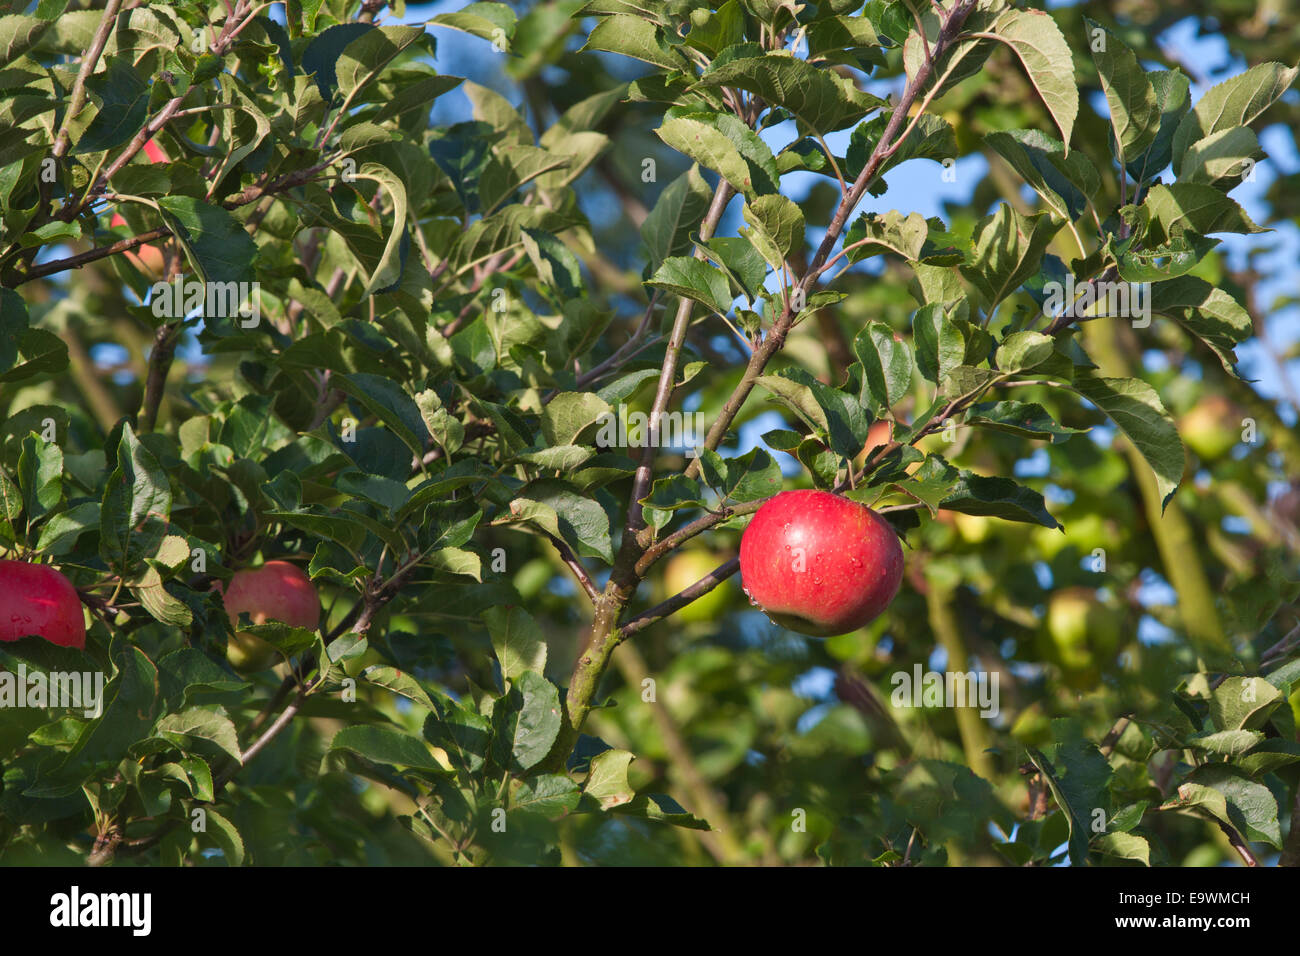 A single red apple ripening on a branch in an orchard. Stock Photo